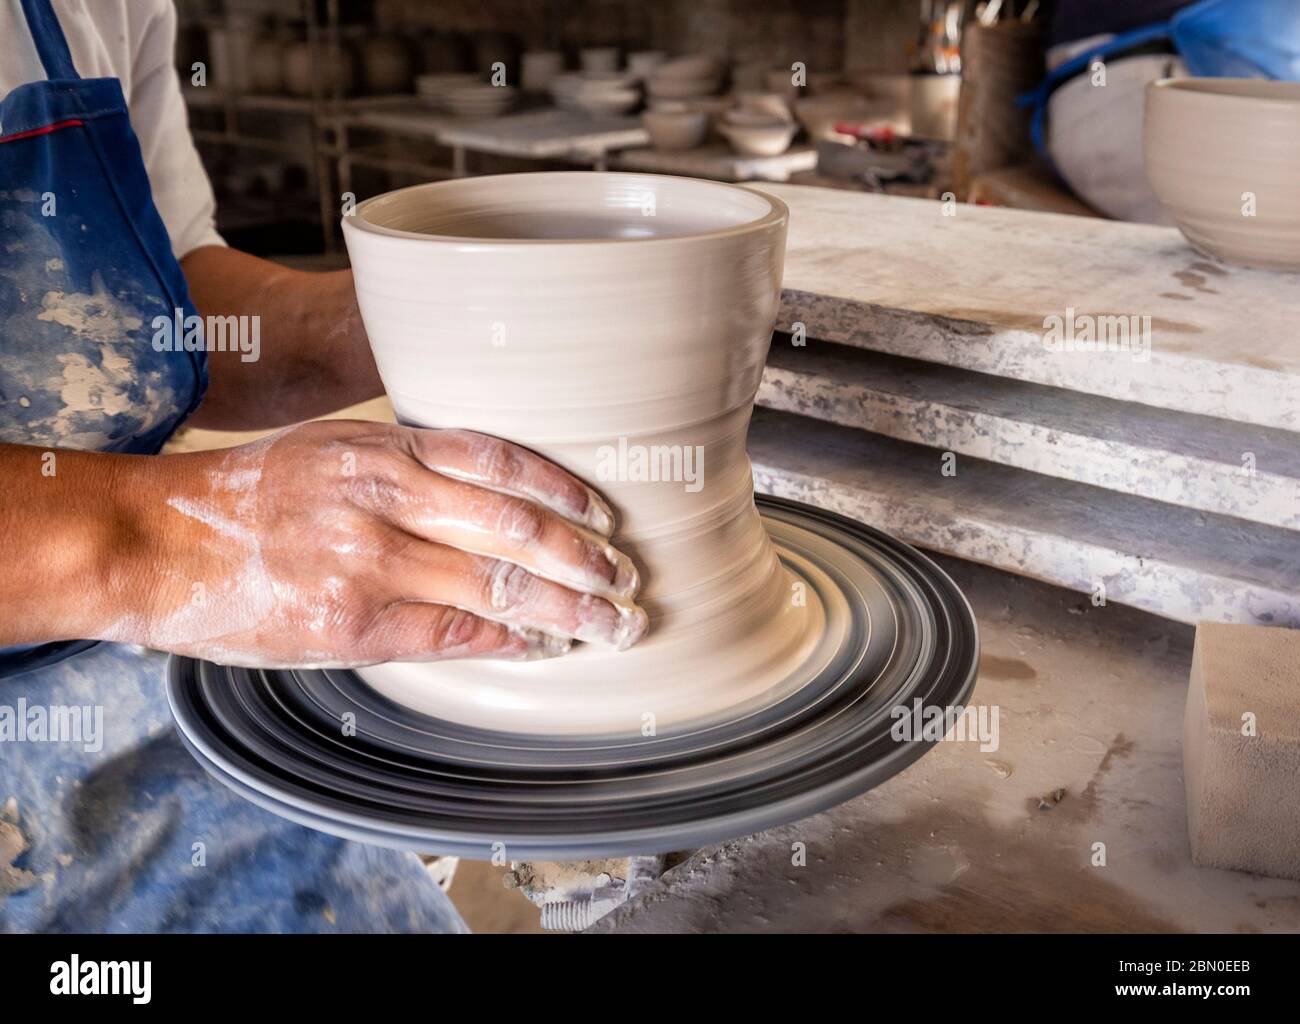 An artisan molds clay bowls in Valle de Bravo in the state of Mexico, Mexico. Stock Photo